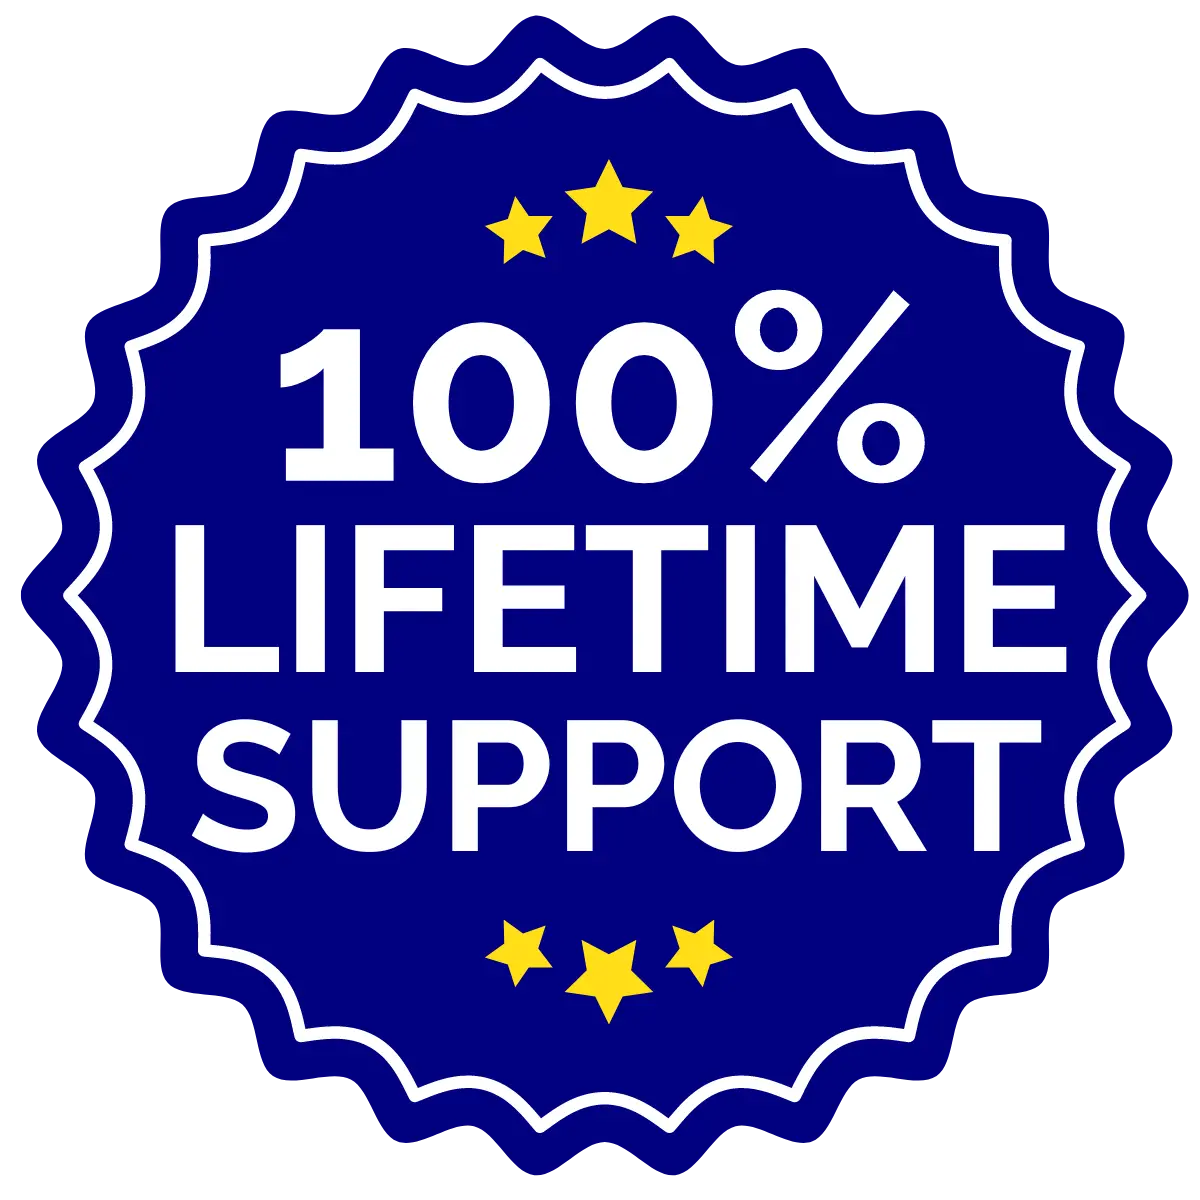 100 LIFETIME SUPPORT